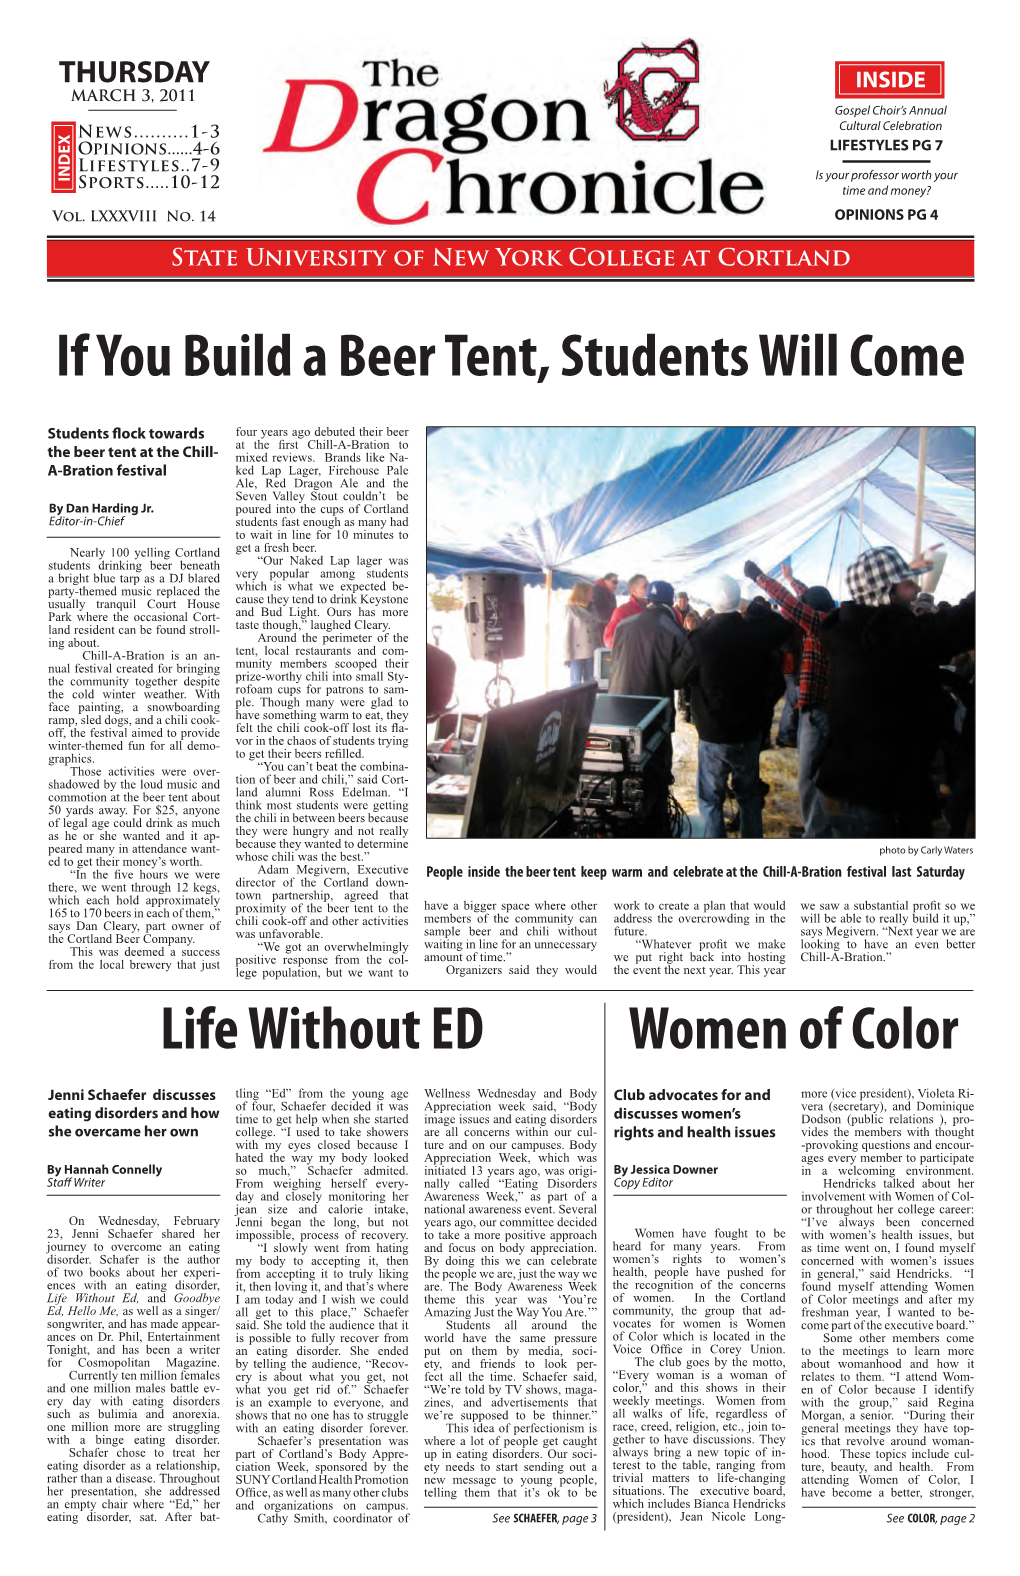 If You Build a Beer Tent, Students Will Come Life Without ED Women of Color